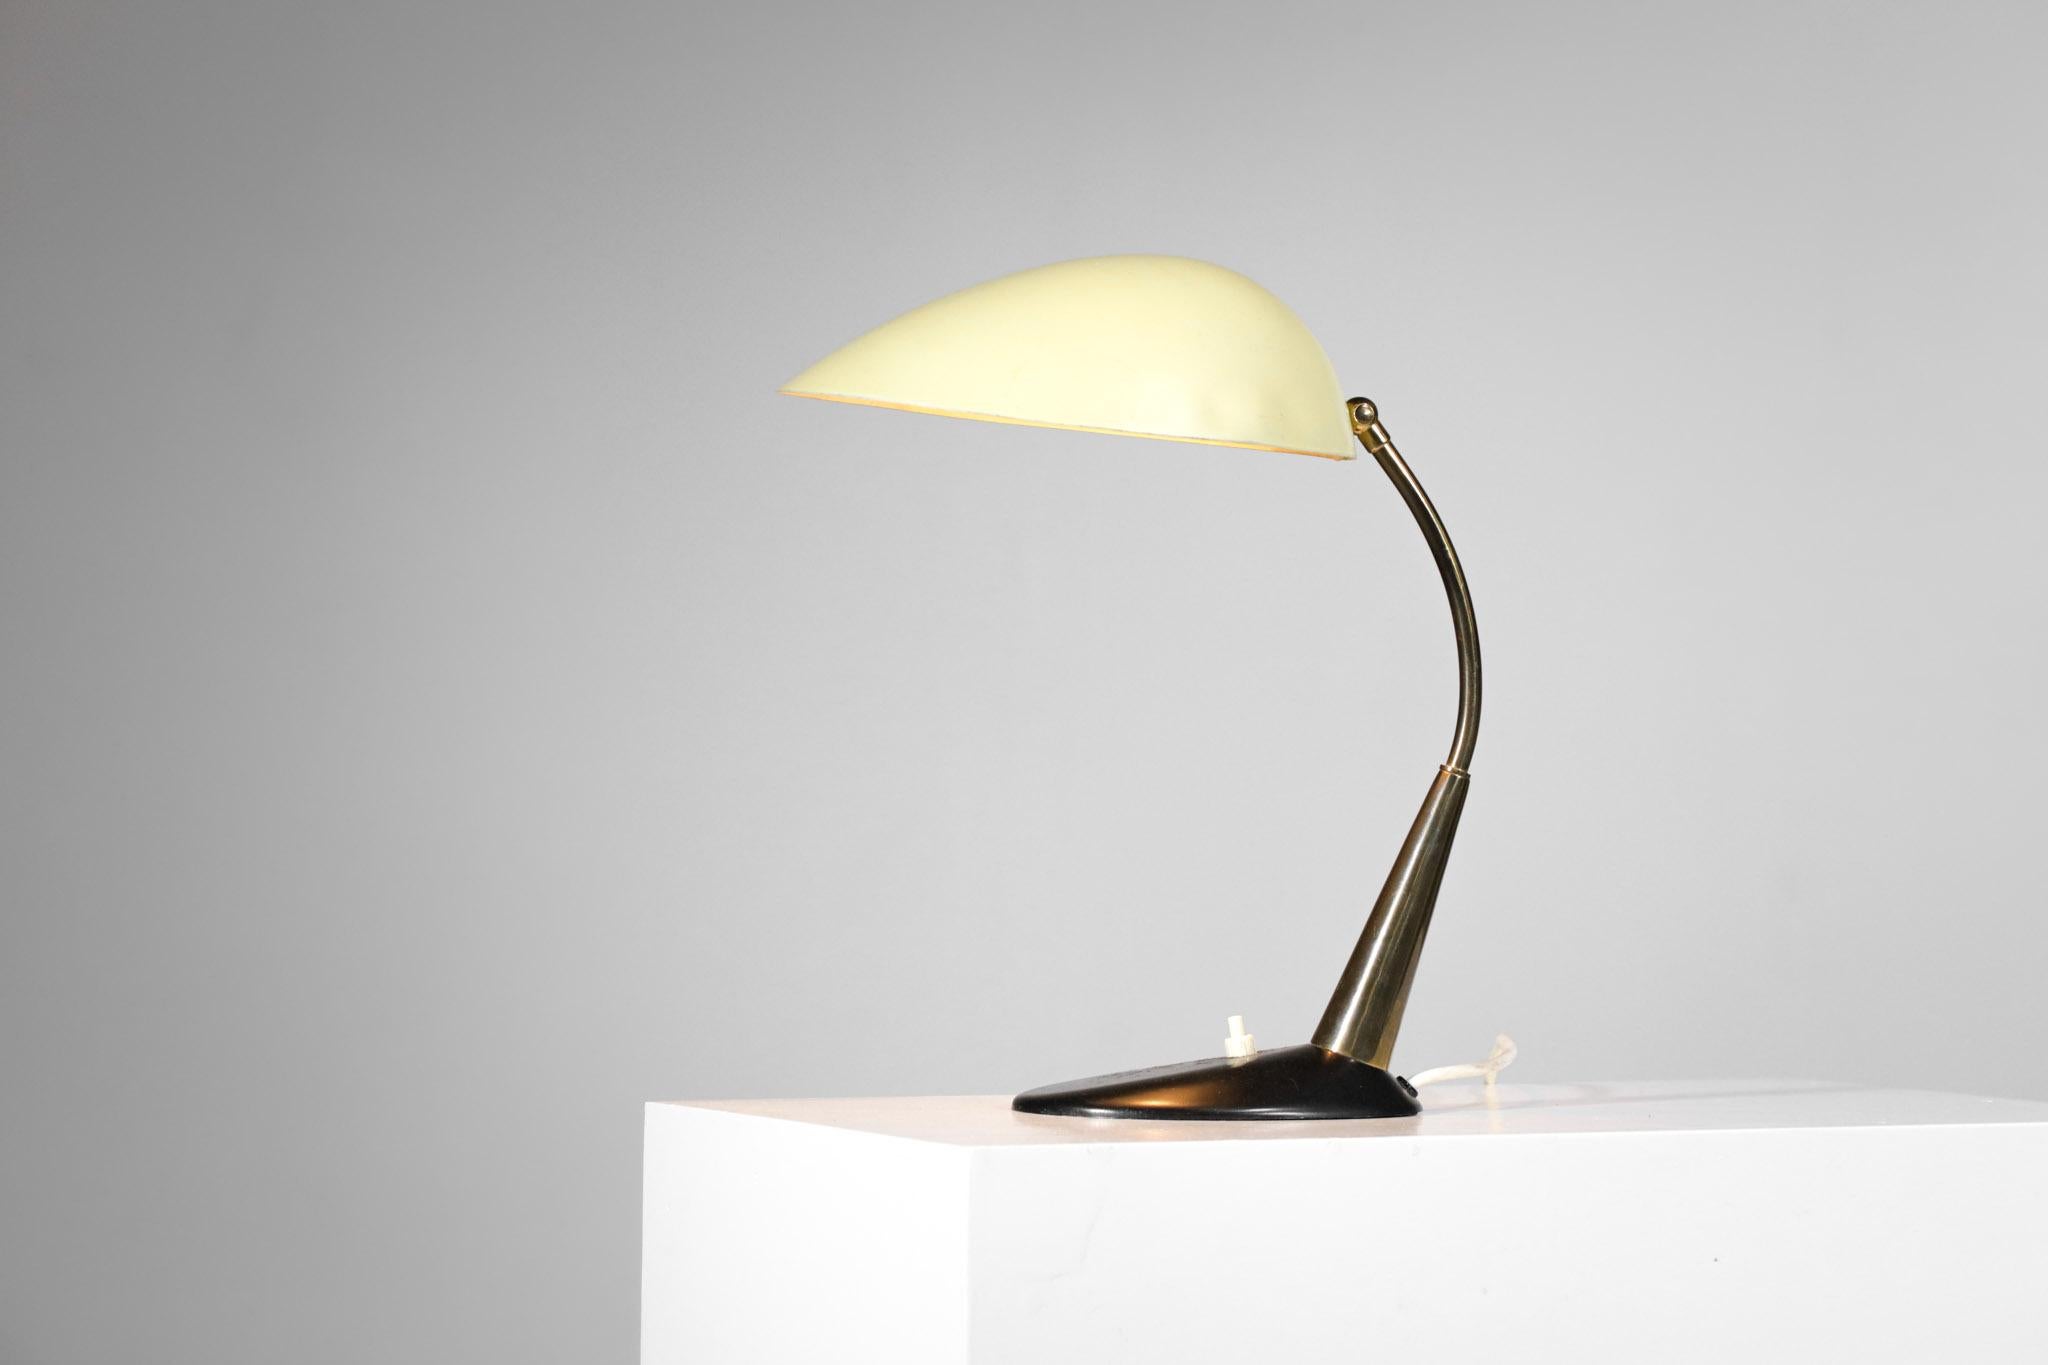 Mid-20th Century Cosack Leuchten Desk, Bedside or Table Lamp 50's Germany, F520 For Sale